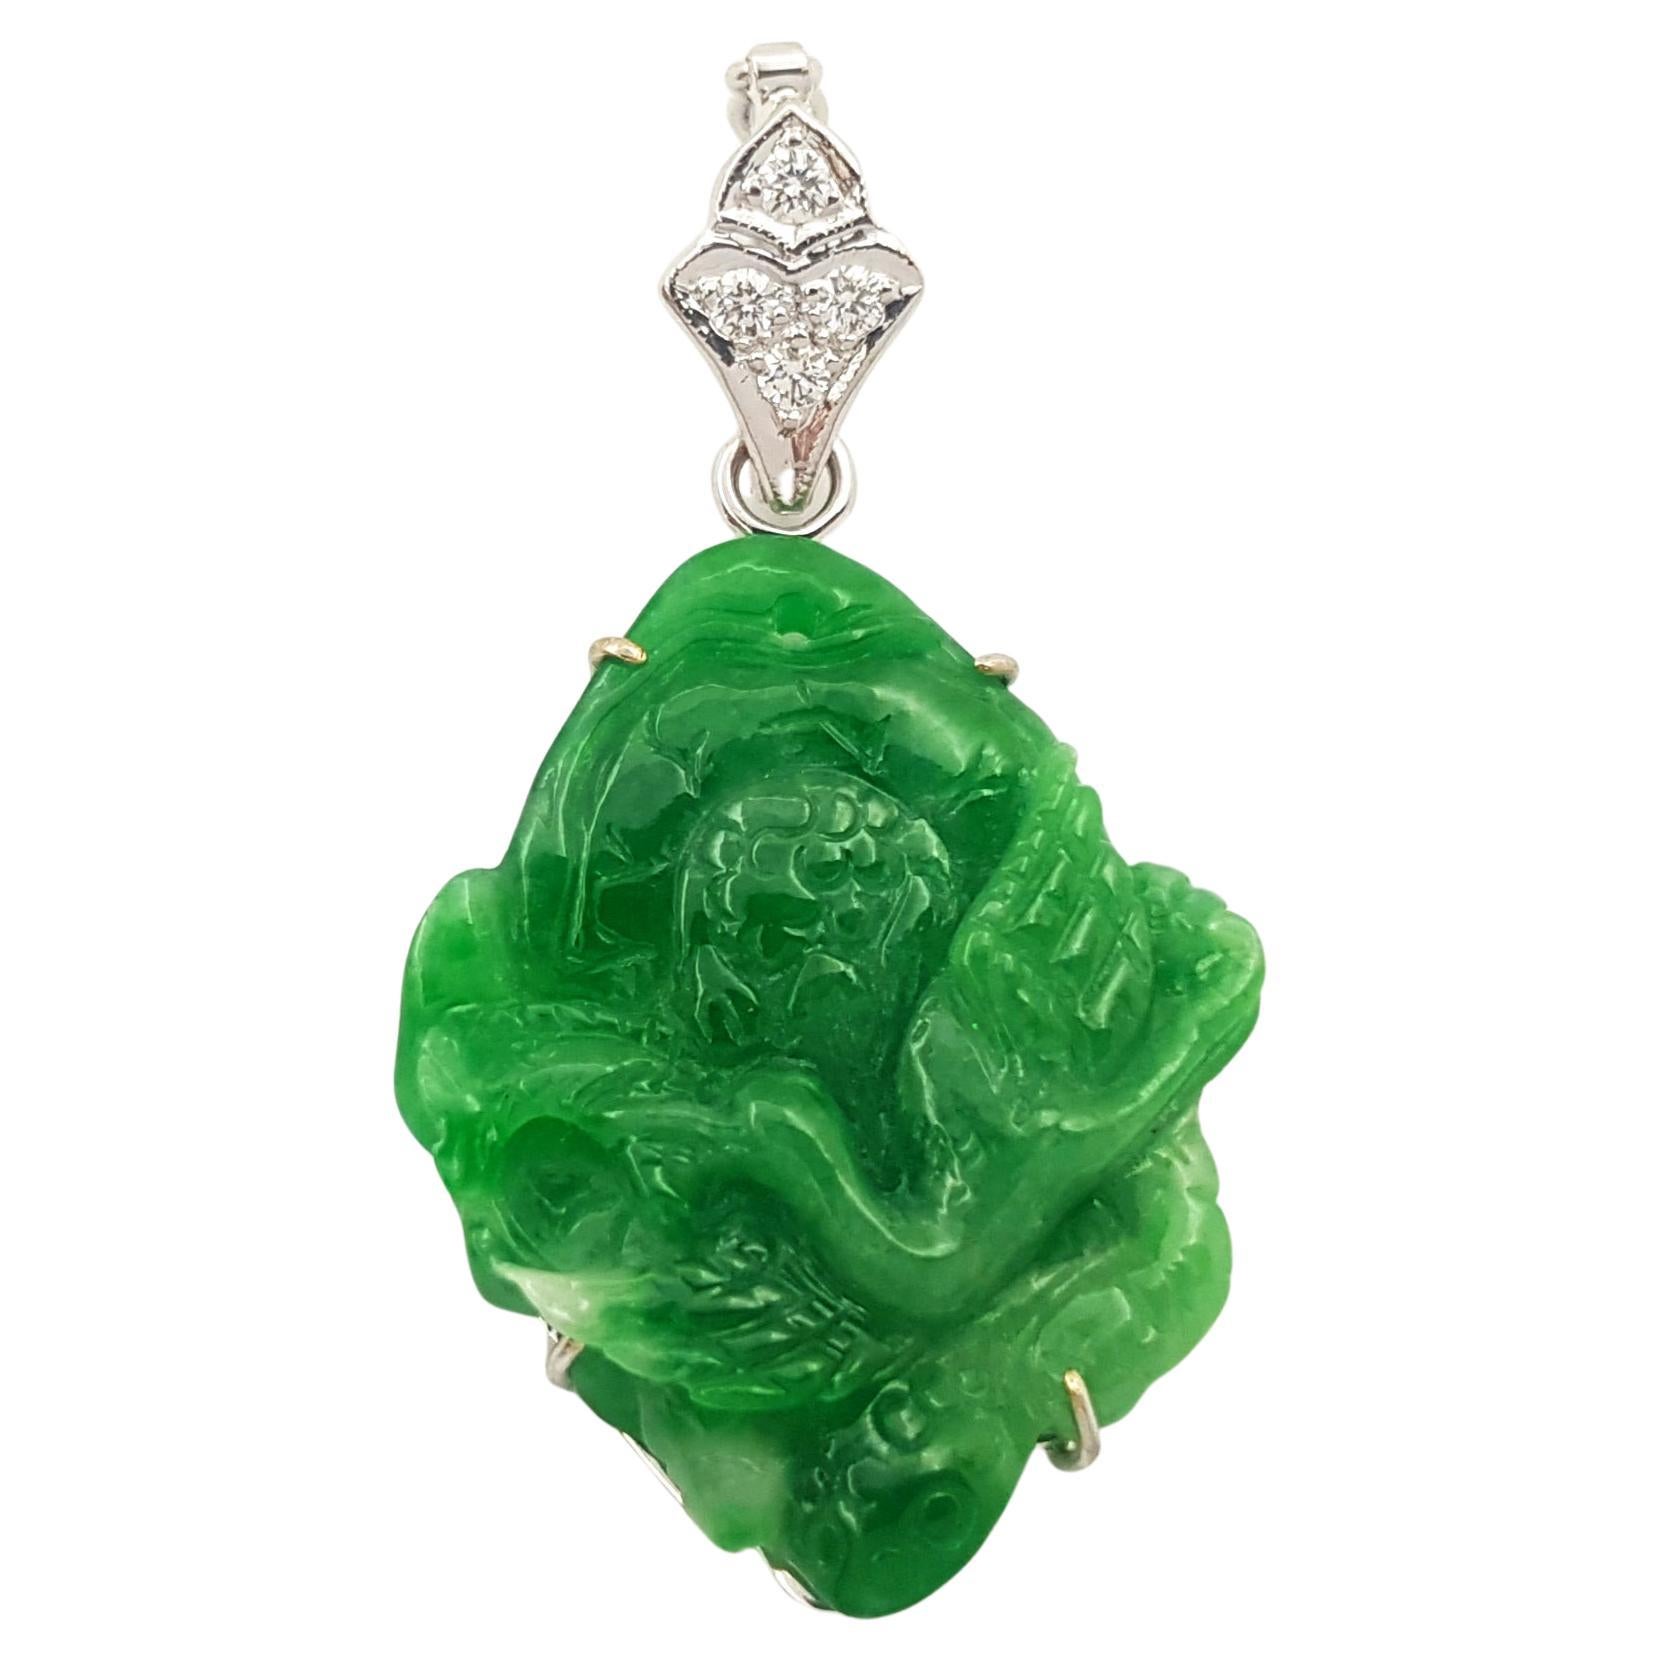 Carved Jade with Diamond 0.10 carat Pendant set in 18K White Gold Settings